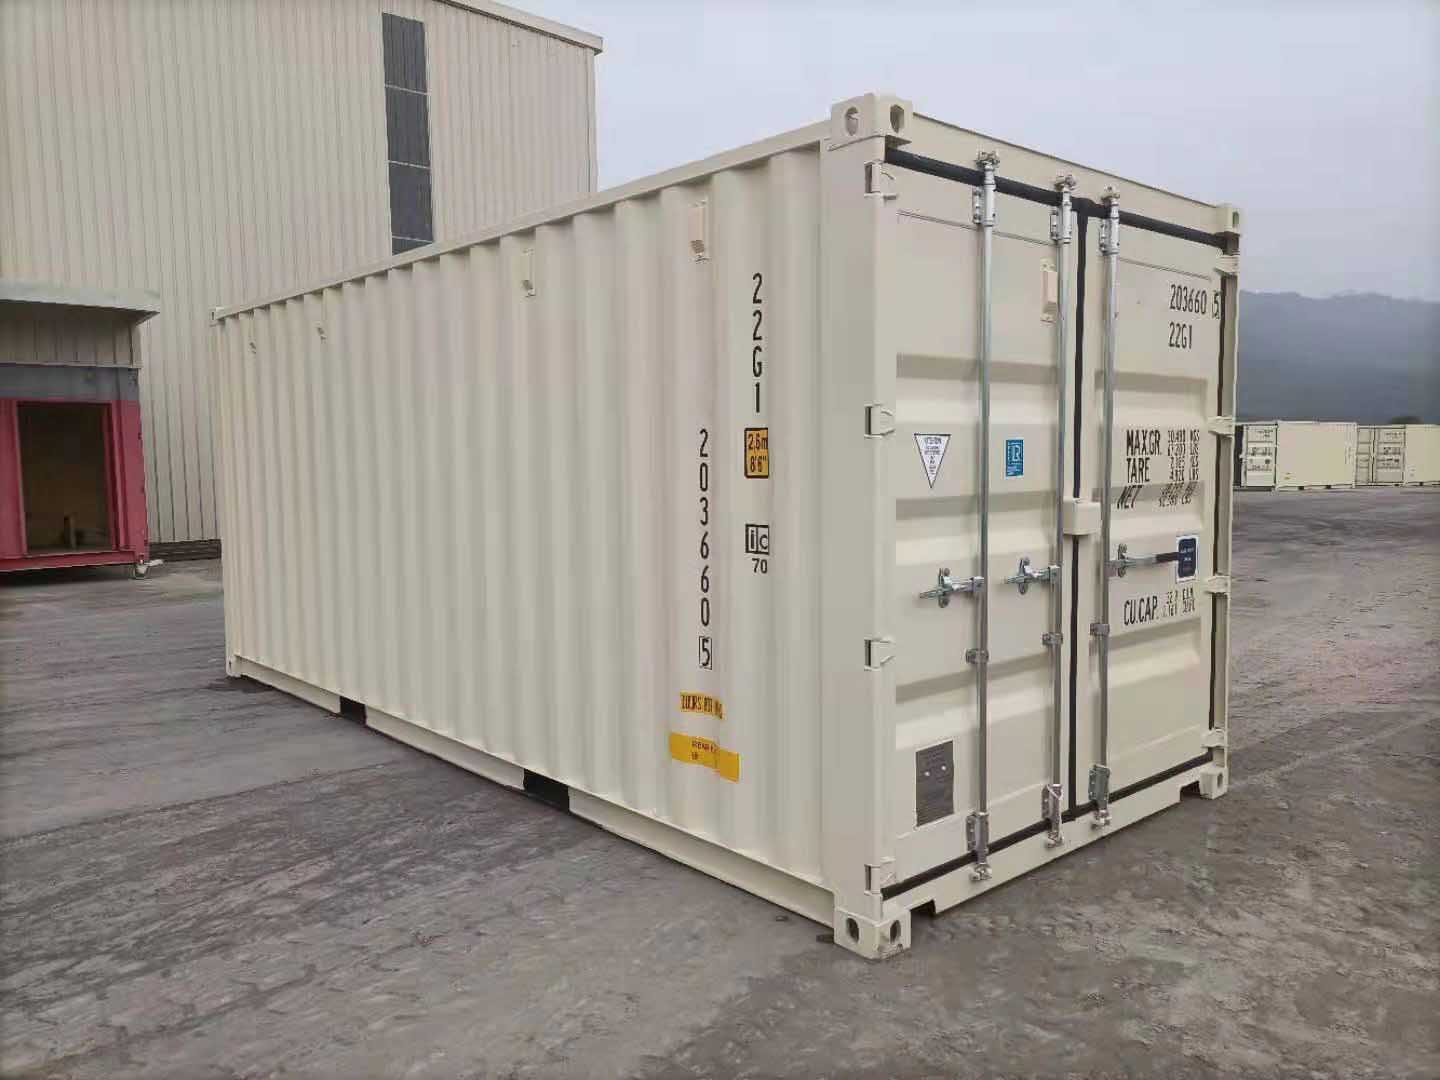 Shipping Containers for Sale in Maryland